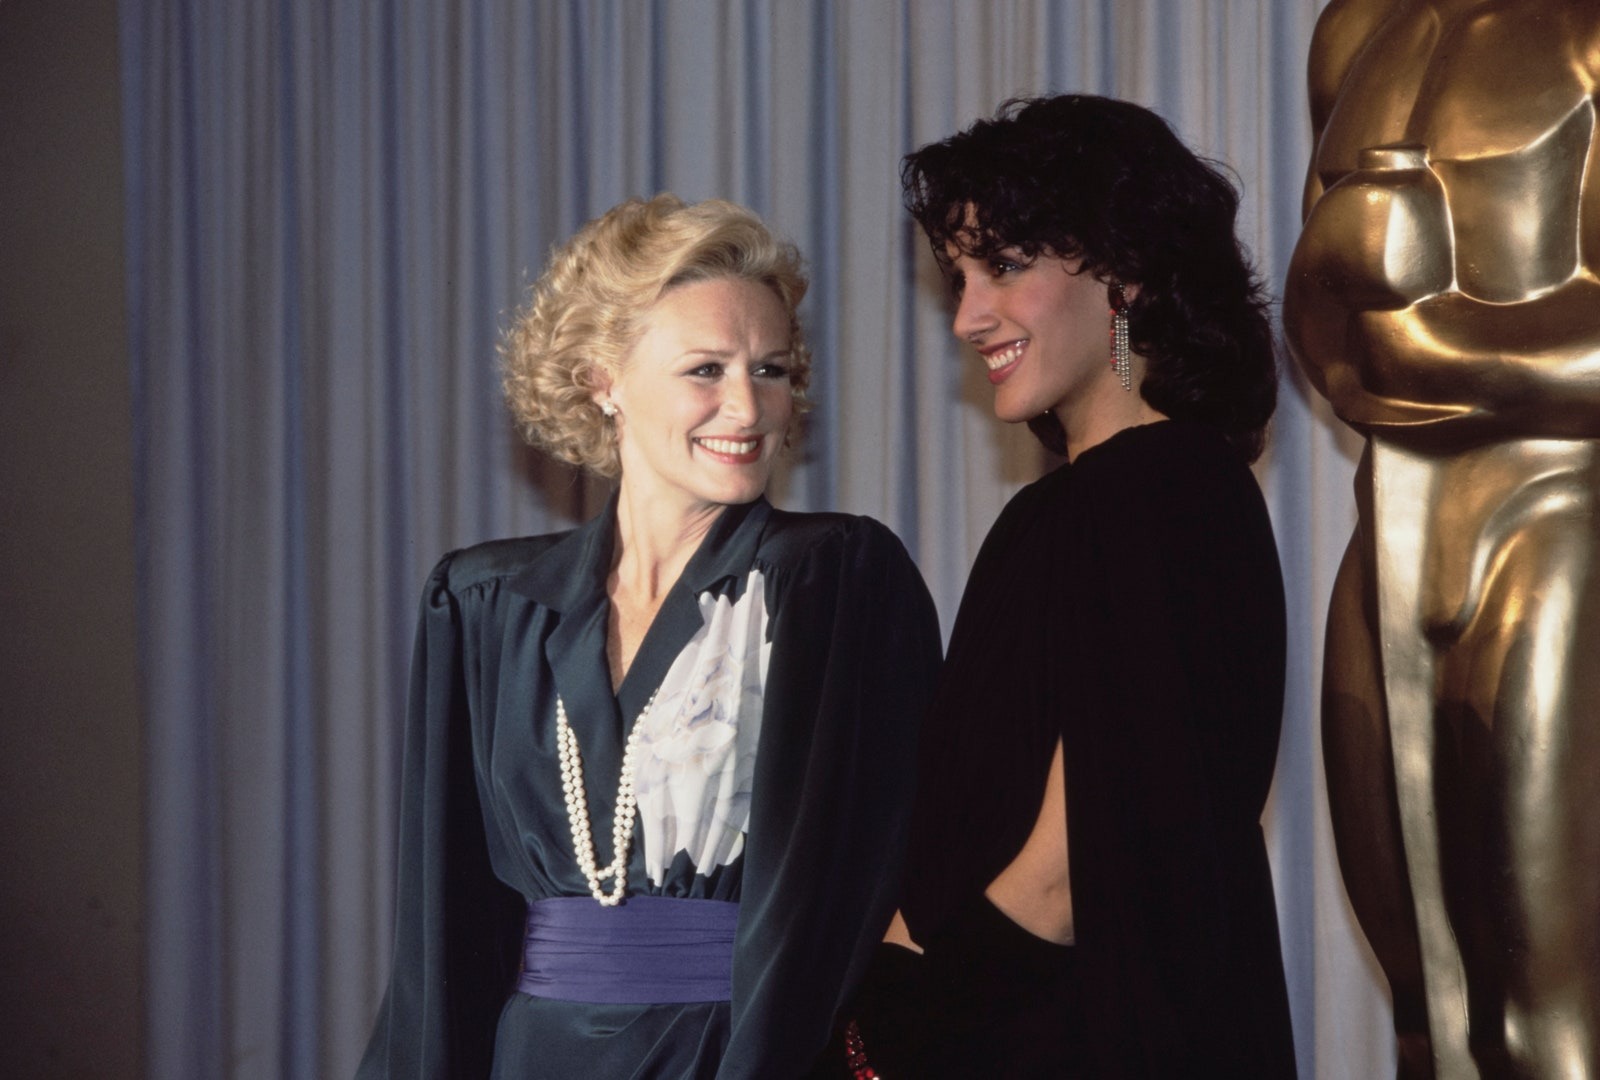 Copy of Glenn Close and Jennifer Beals at the Oscars in 1985.Photo Getty Images